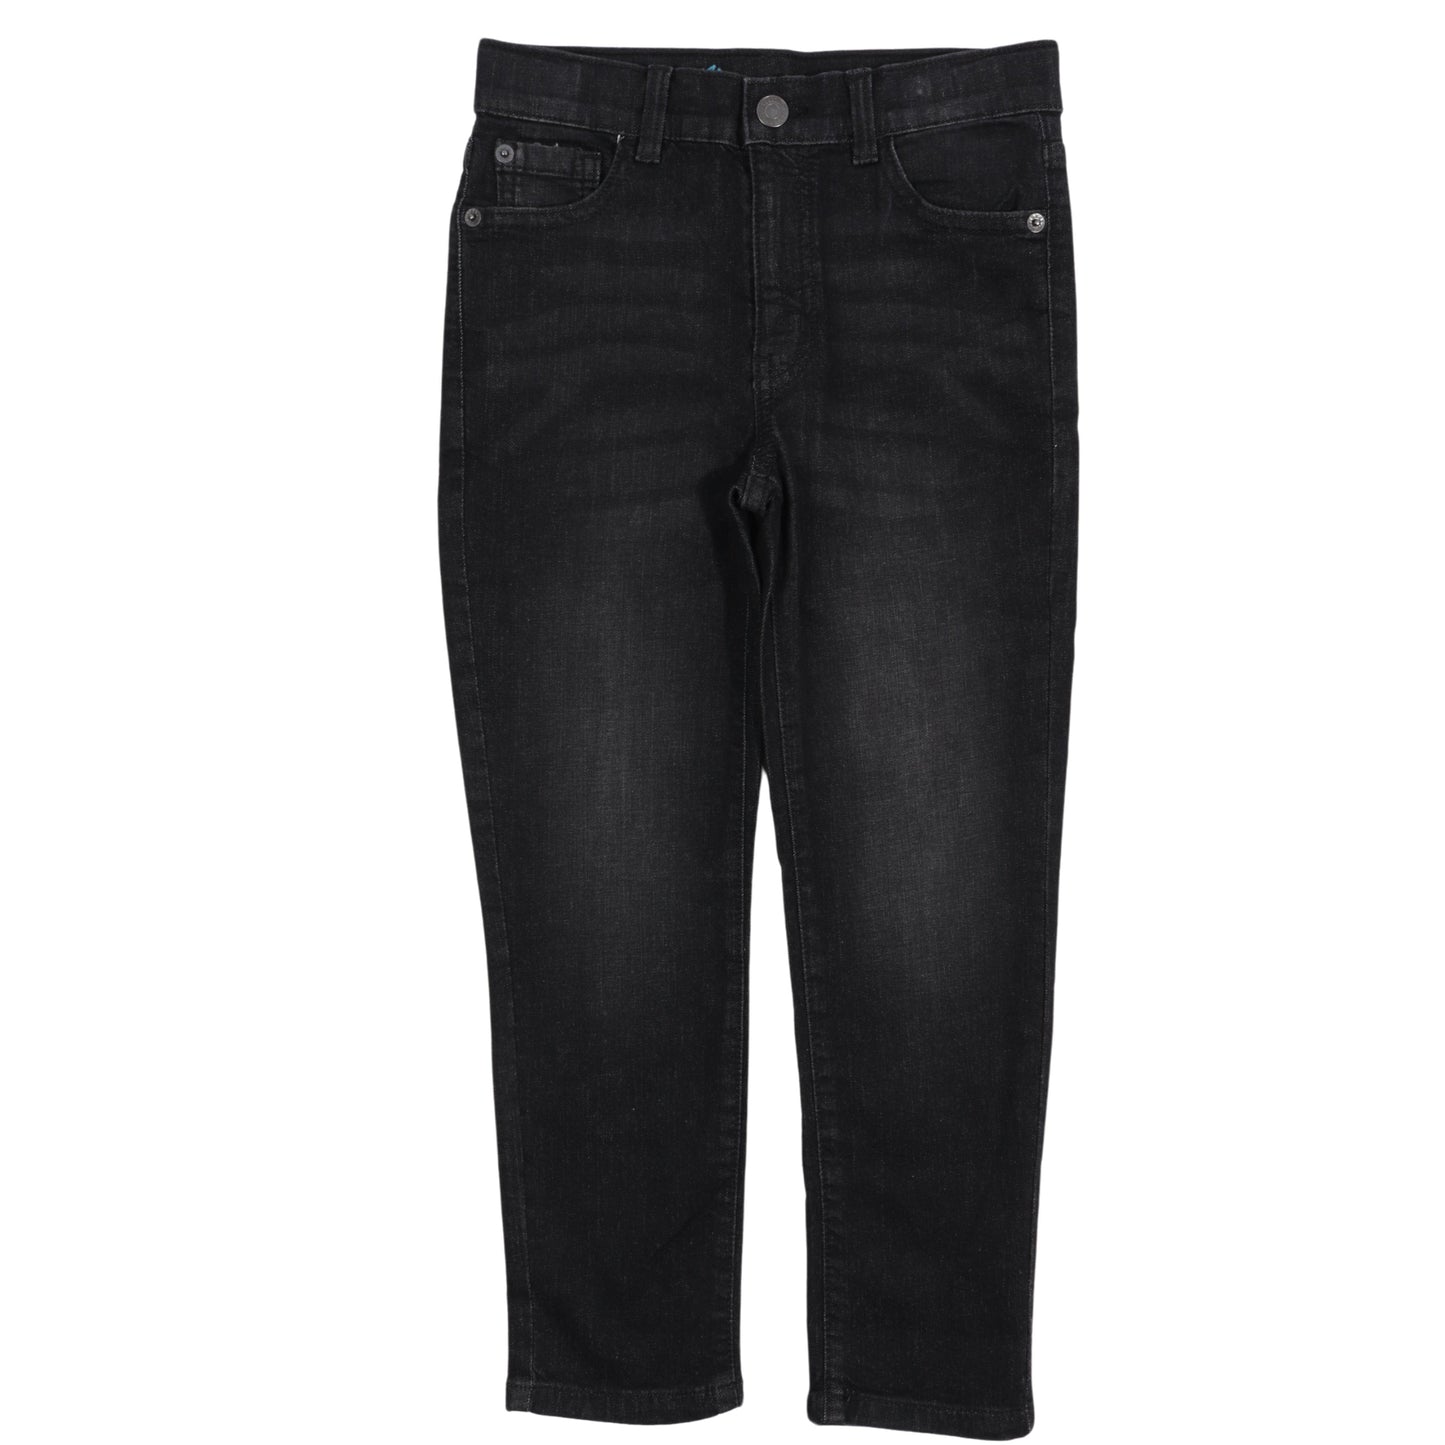 THEREABOUTS Girls Bottoms XS / Black THEREABOUTS - Belt Loops Jeans